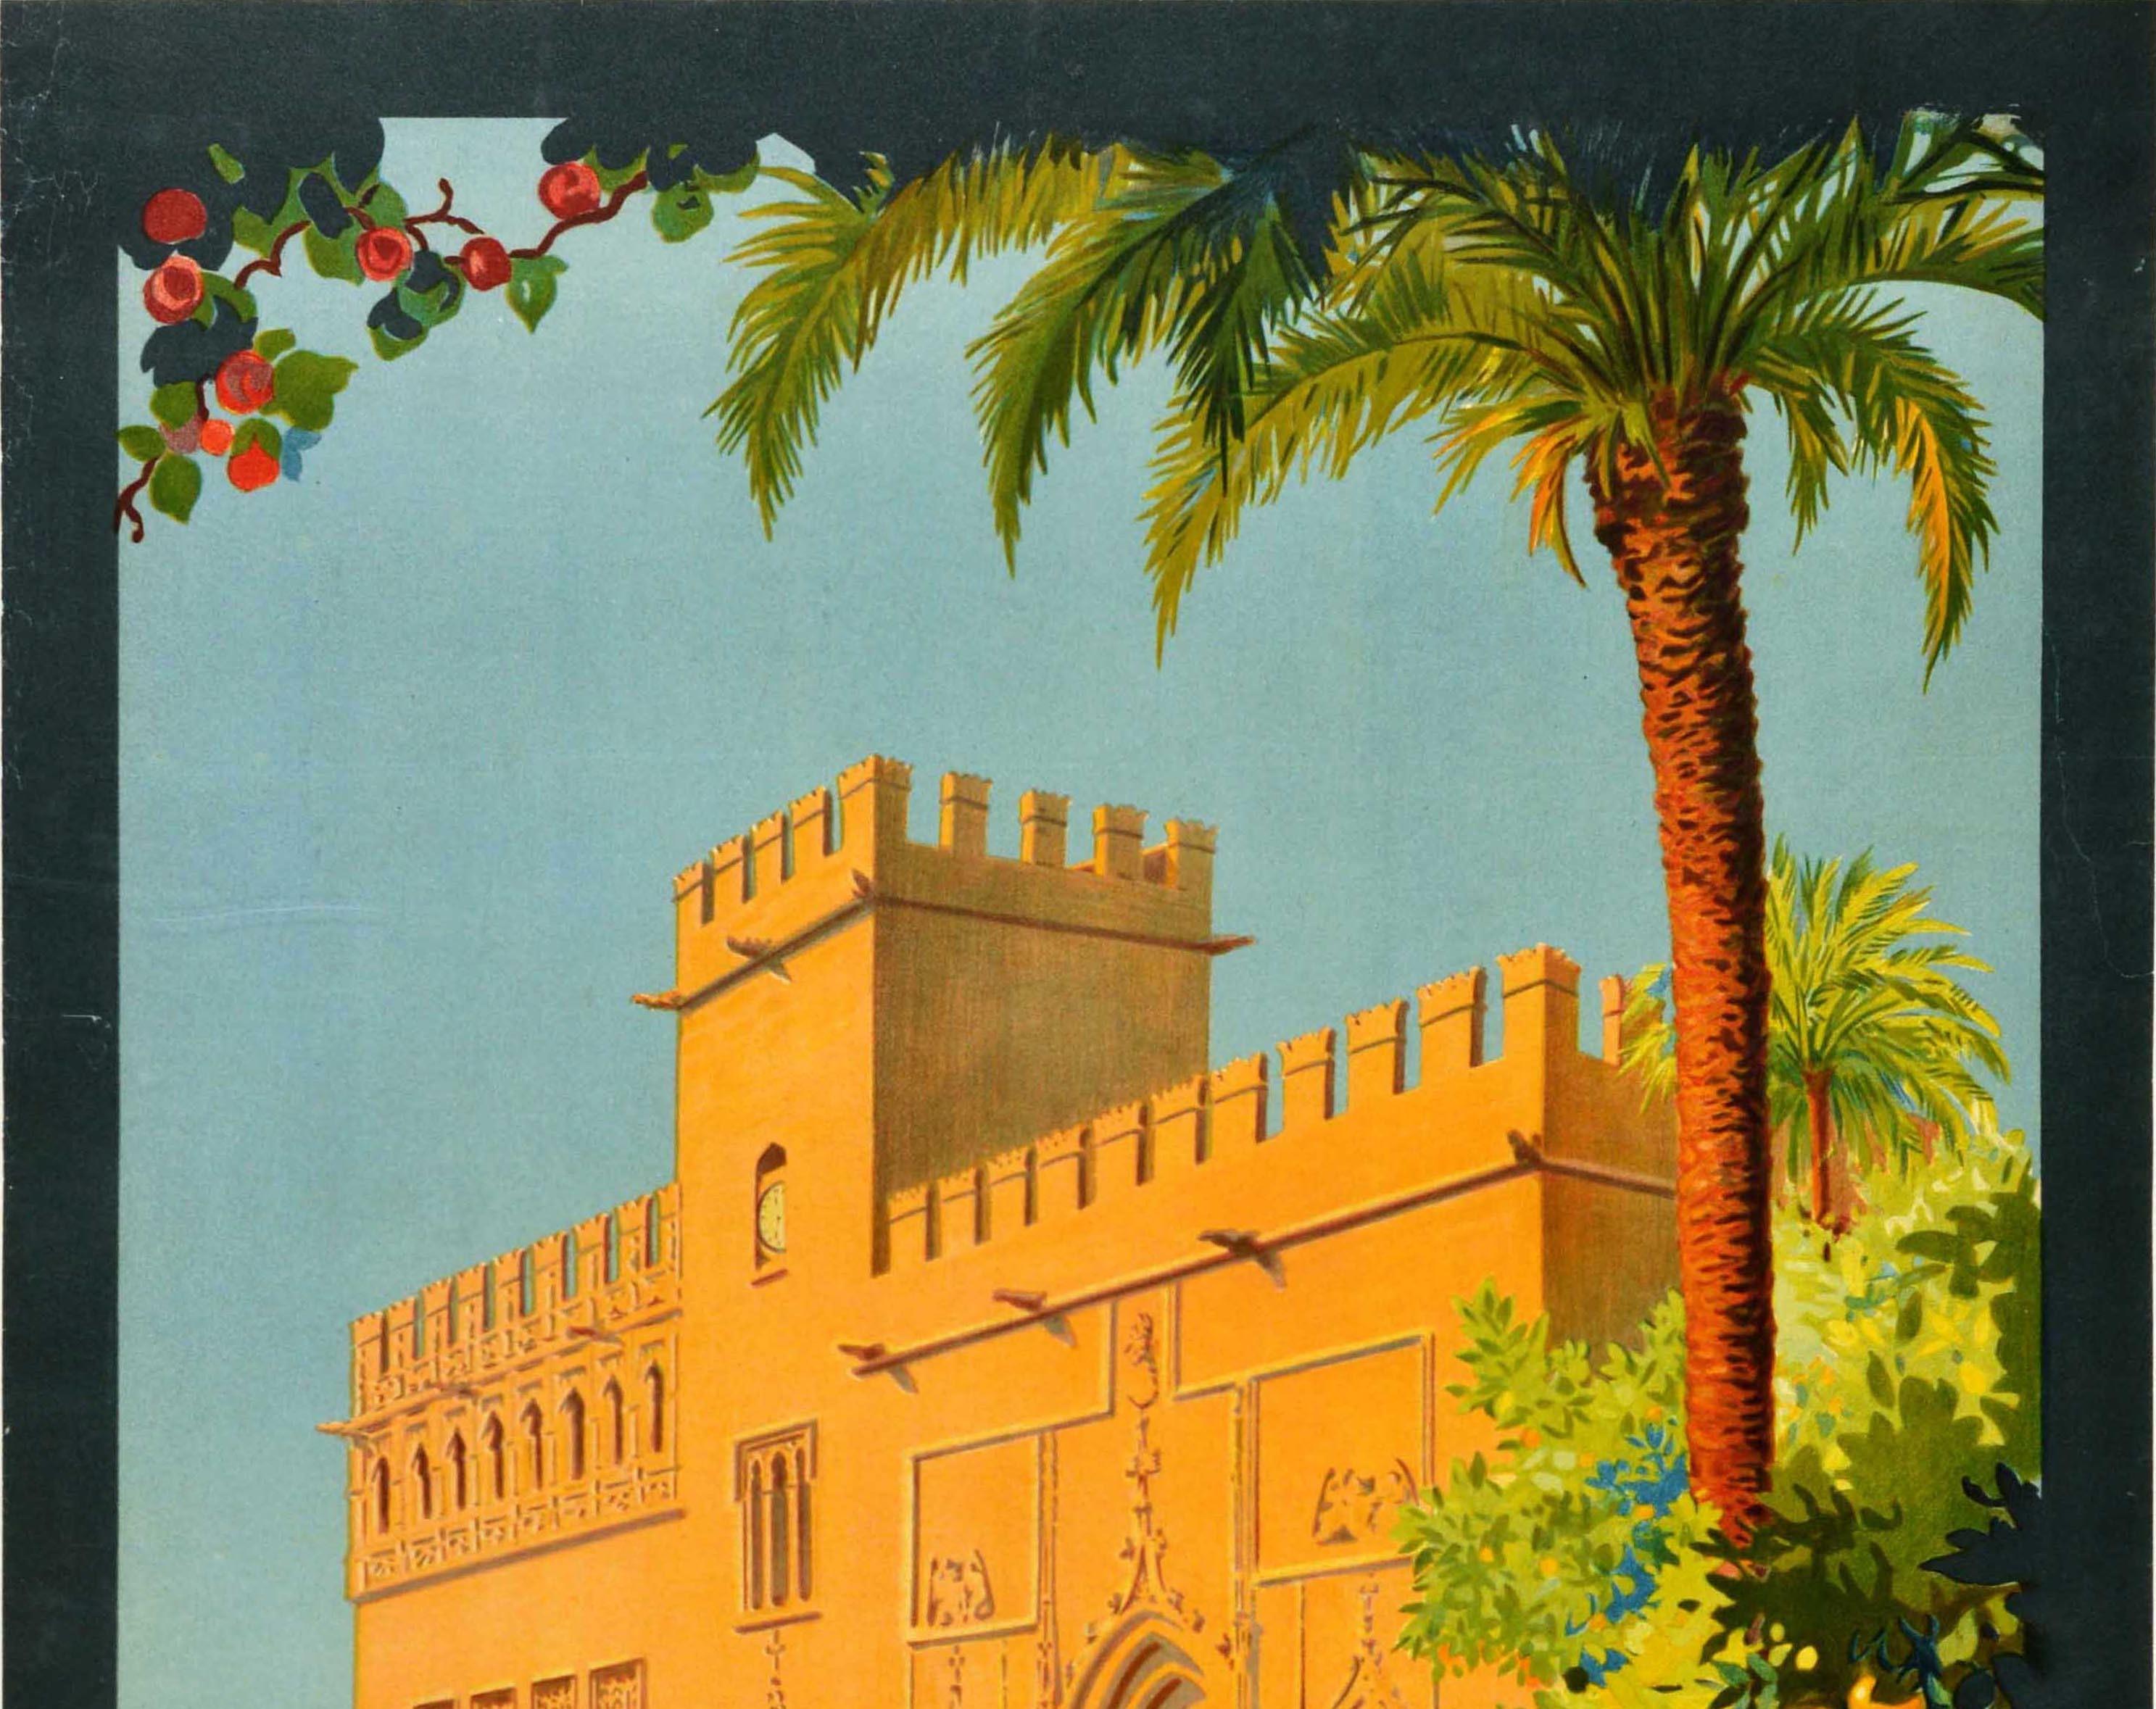 Original vintage travel poster for Valencia Sovereign of Nature / Soberana de la Naturaleza issued by Fomento Del Turismo. Stunning design featuring the historic 15th century Lonja de la Seda Silk Exchange building framed by a palm tree with fruit